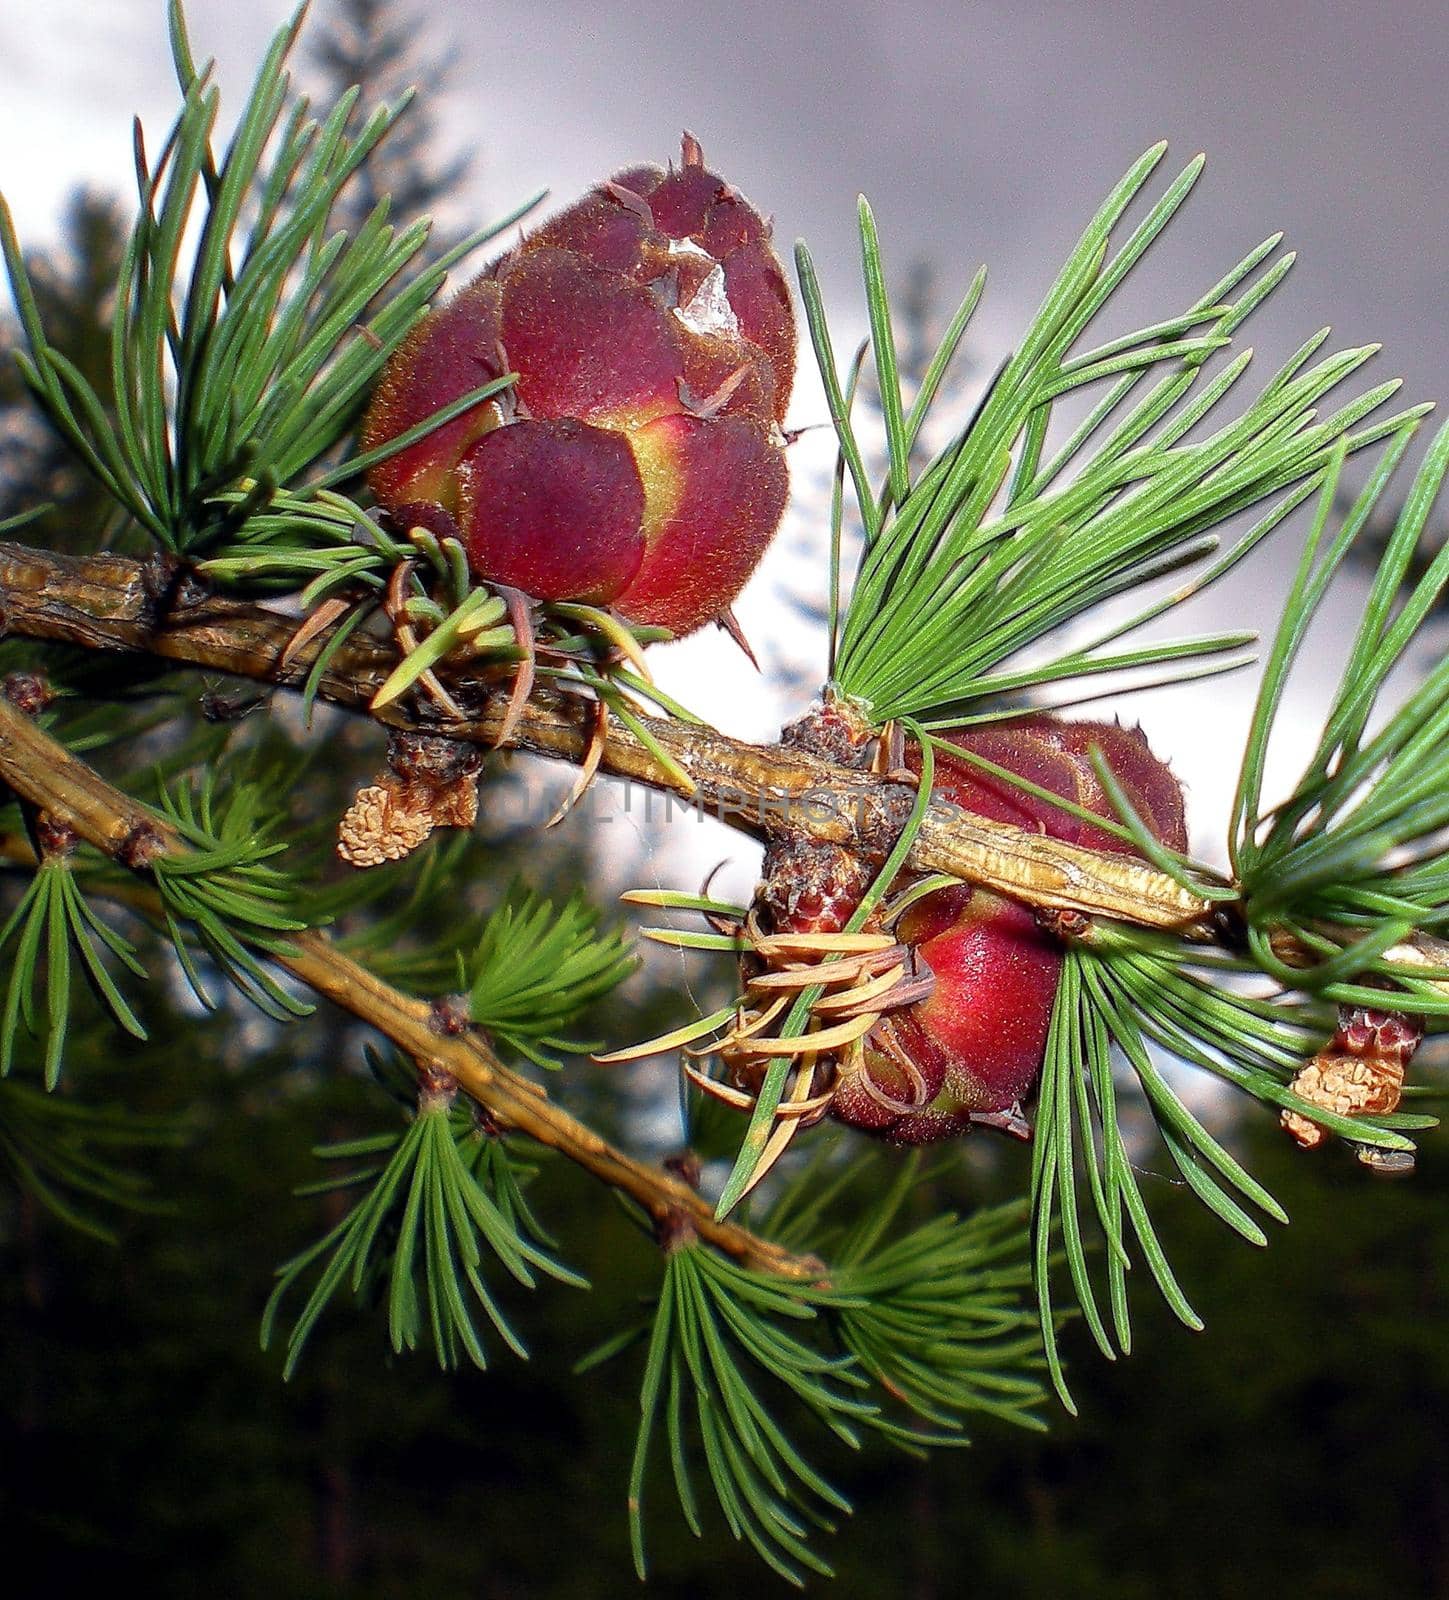 Young bumps on the branches of the Christmas tree. Blossom needles. by DePo